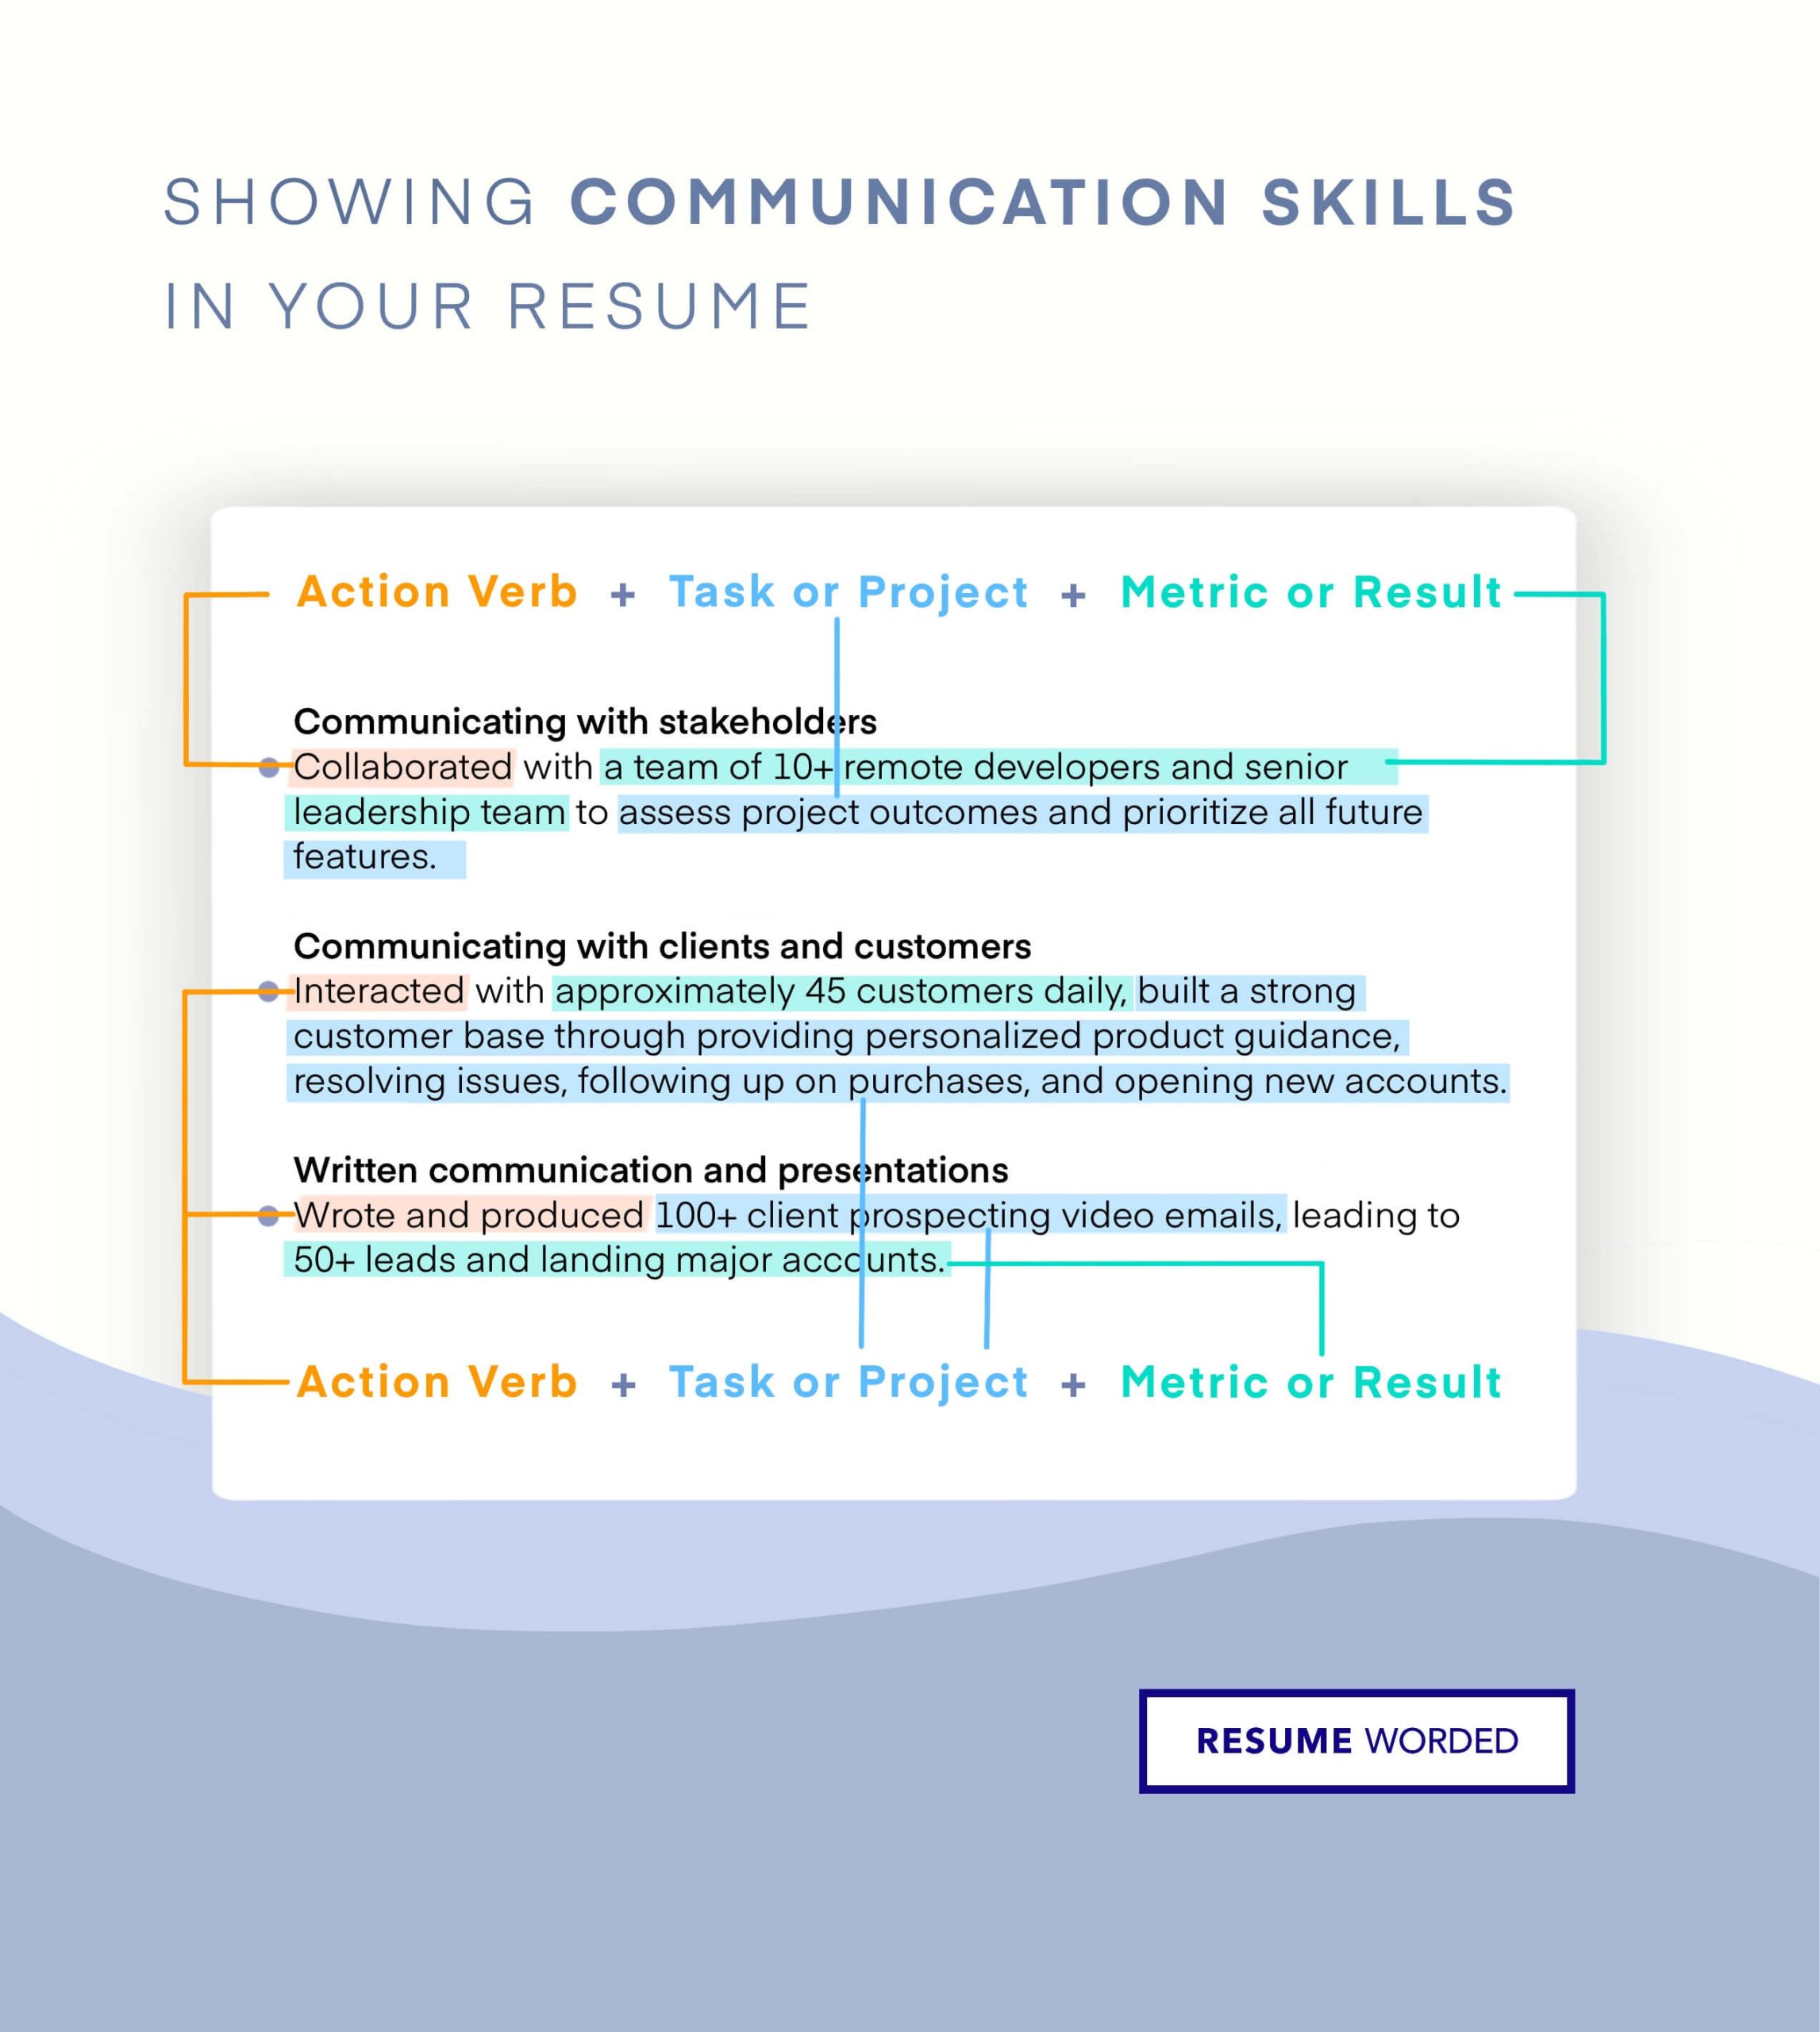 Oral and Interpersonal Communication On Resume Sample Communication Skills On Resume: What Do Recruiters Look for?